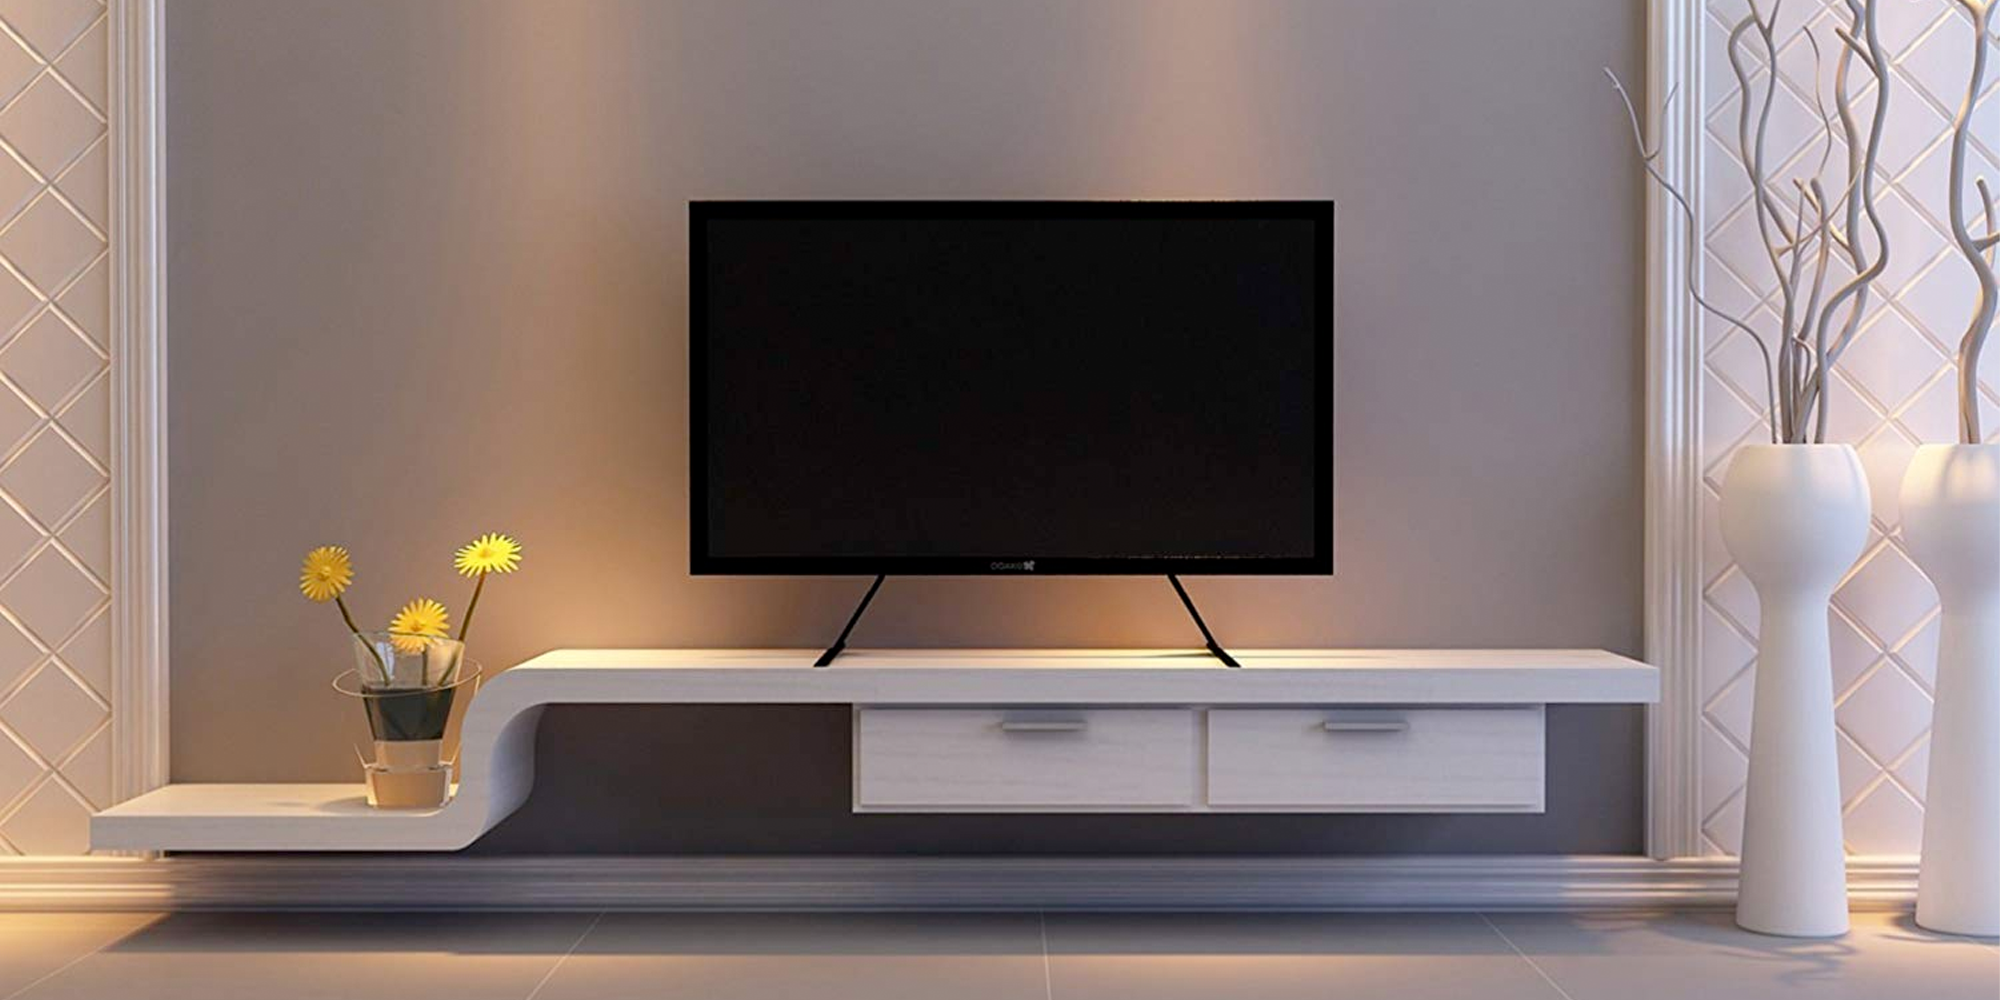 Lose your old TV stand or just don